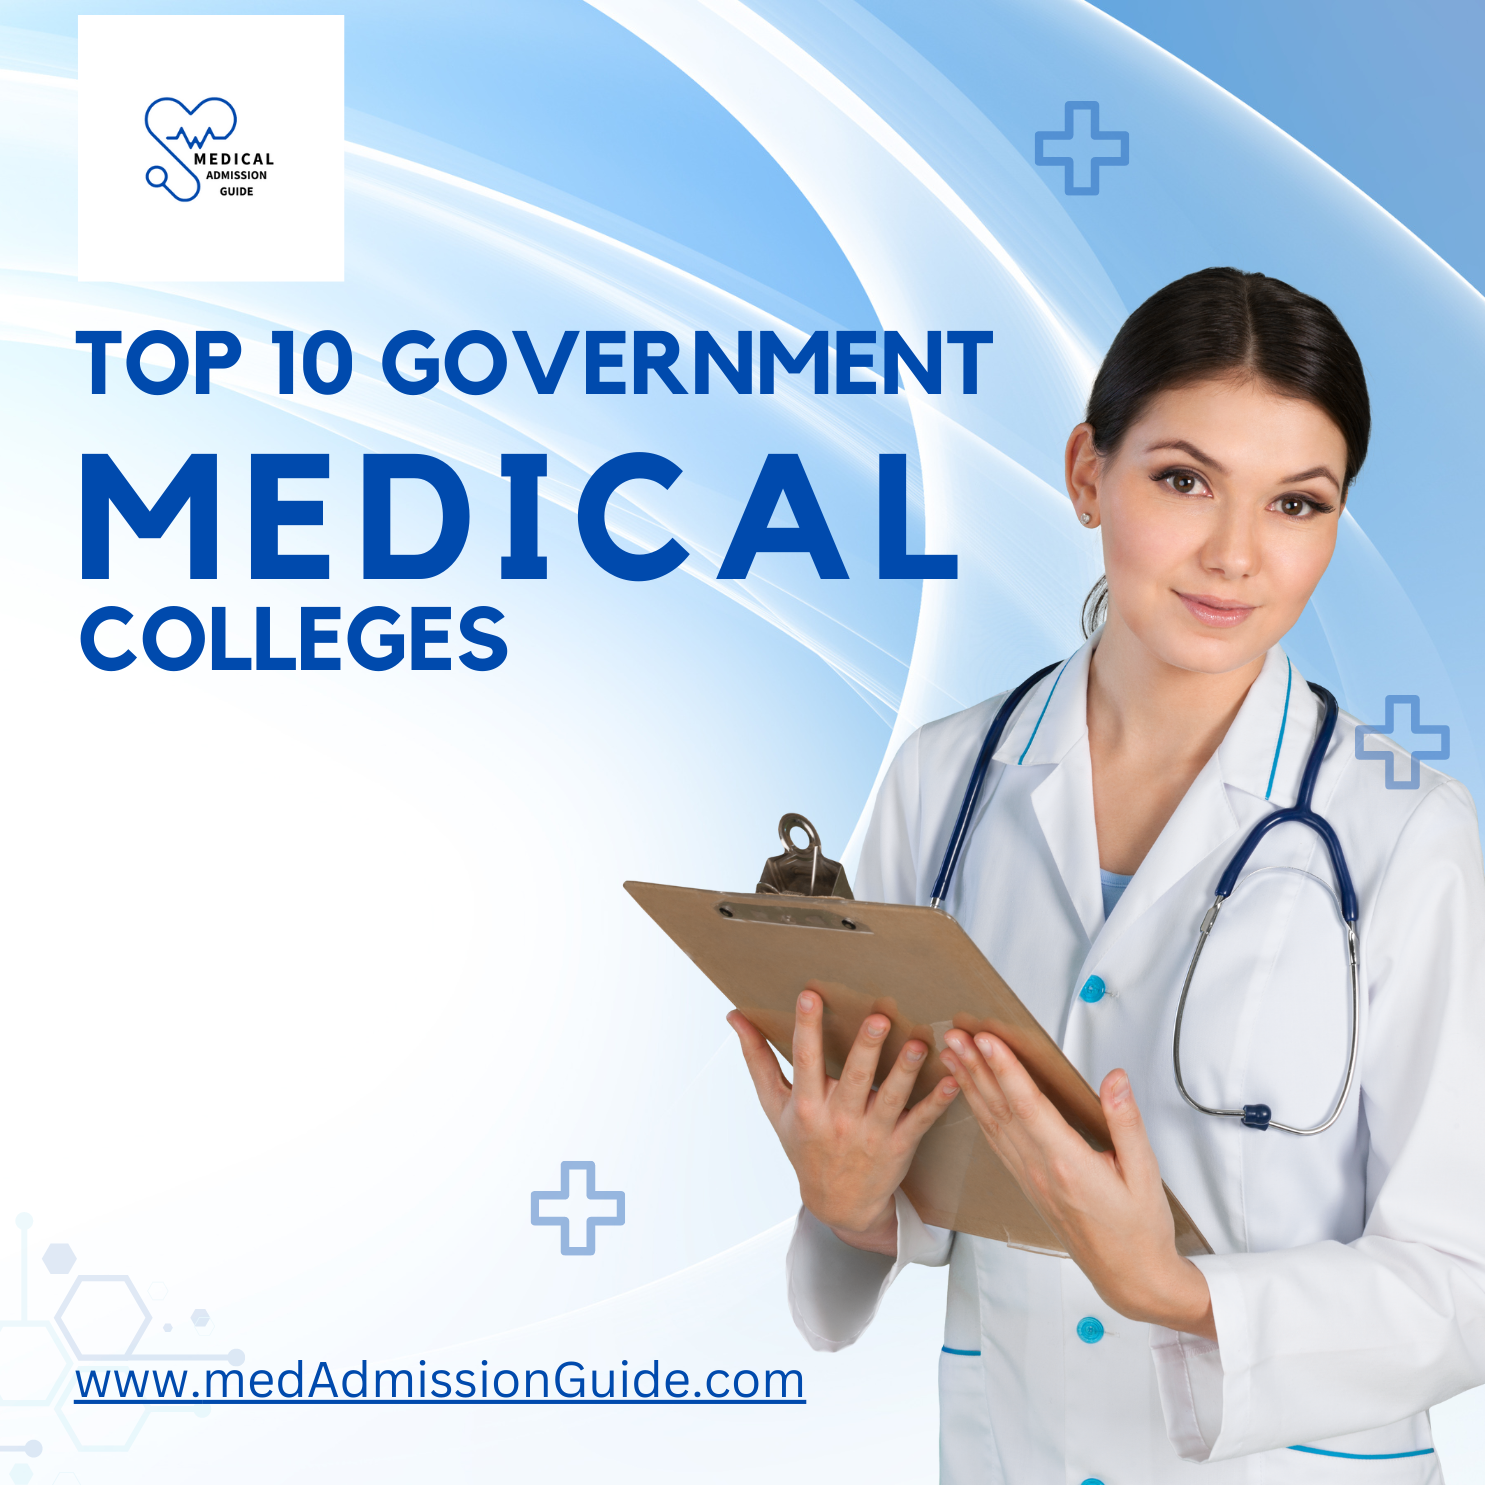 Top 10 government medical colleges in India